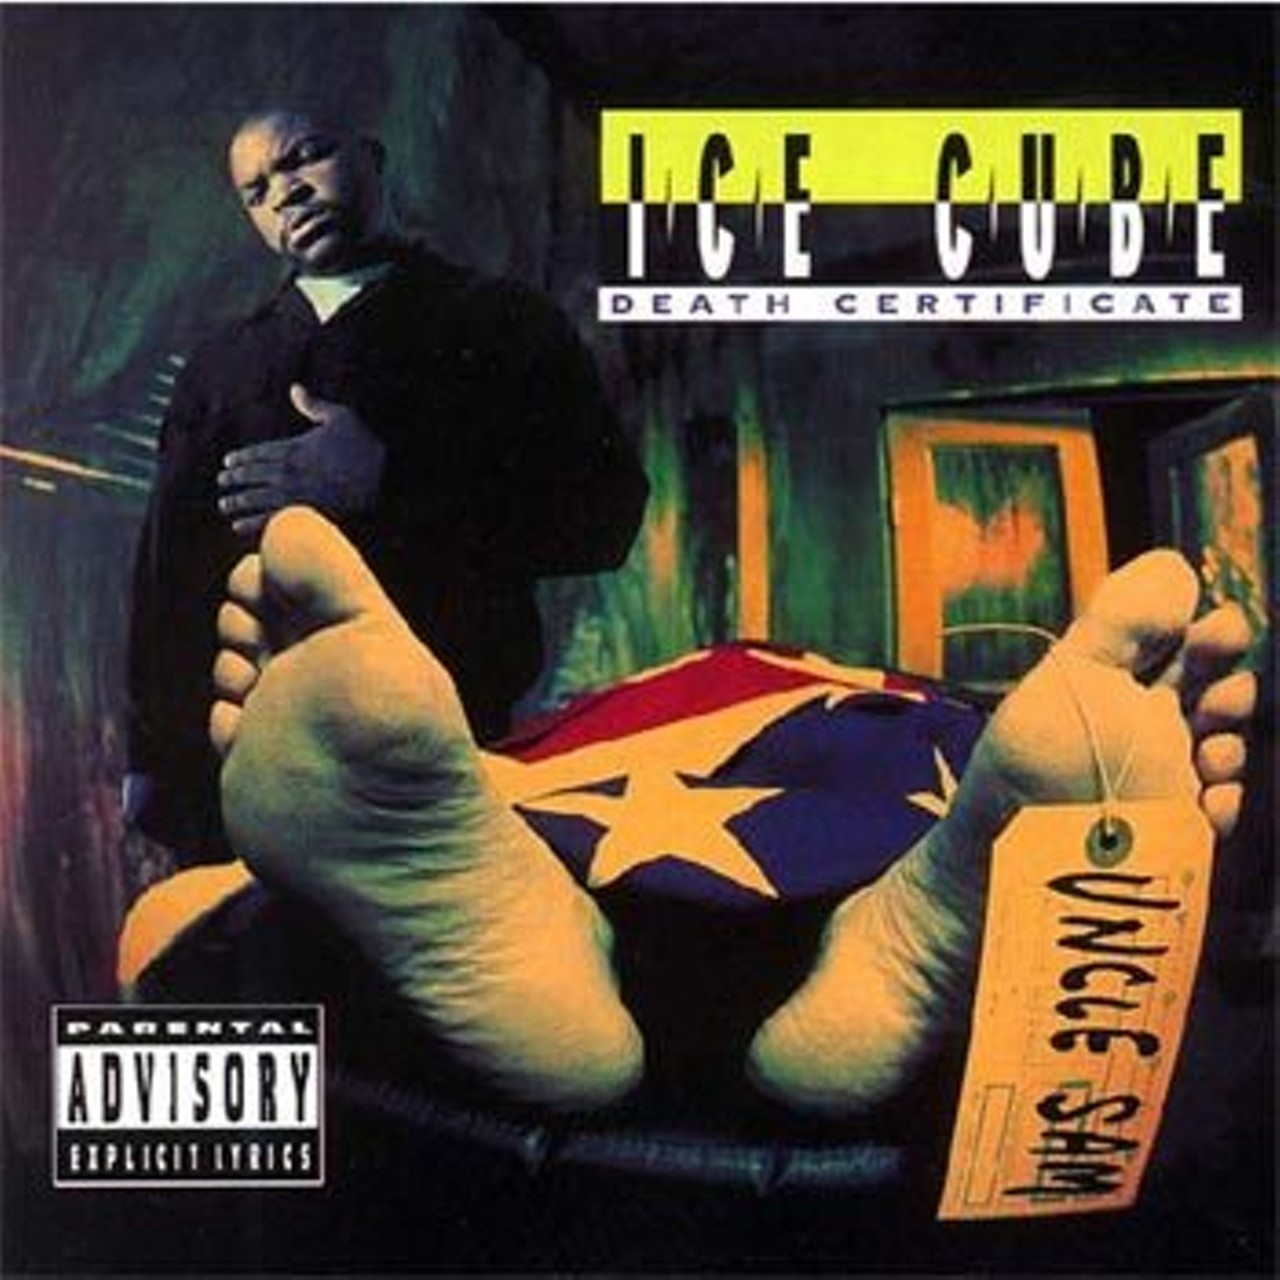 3. Ice Cube's "Death Certificate" wraps a cold body in a flag; the dangling label reads "Uncle Sam."